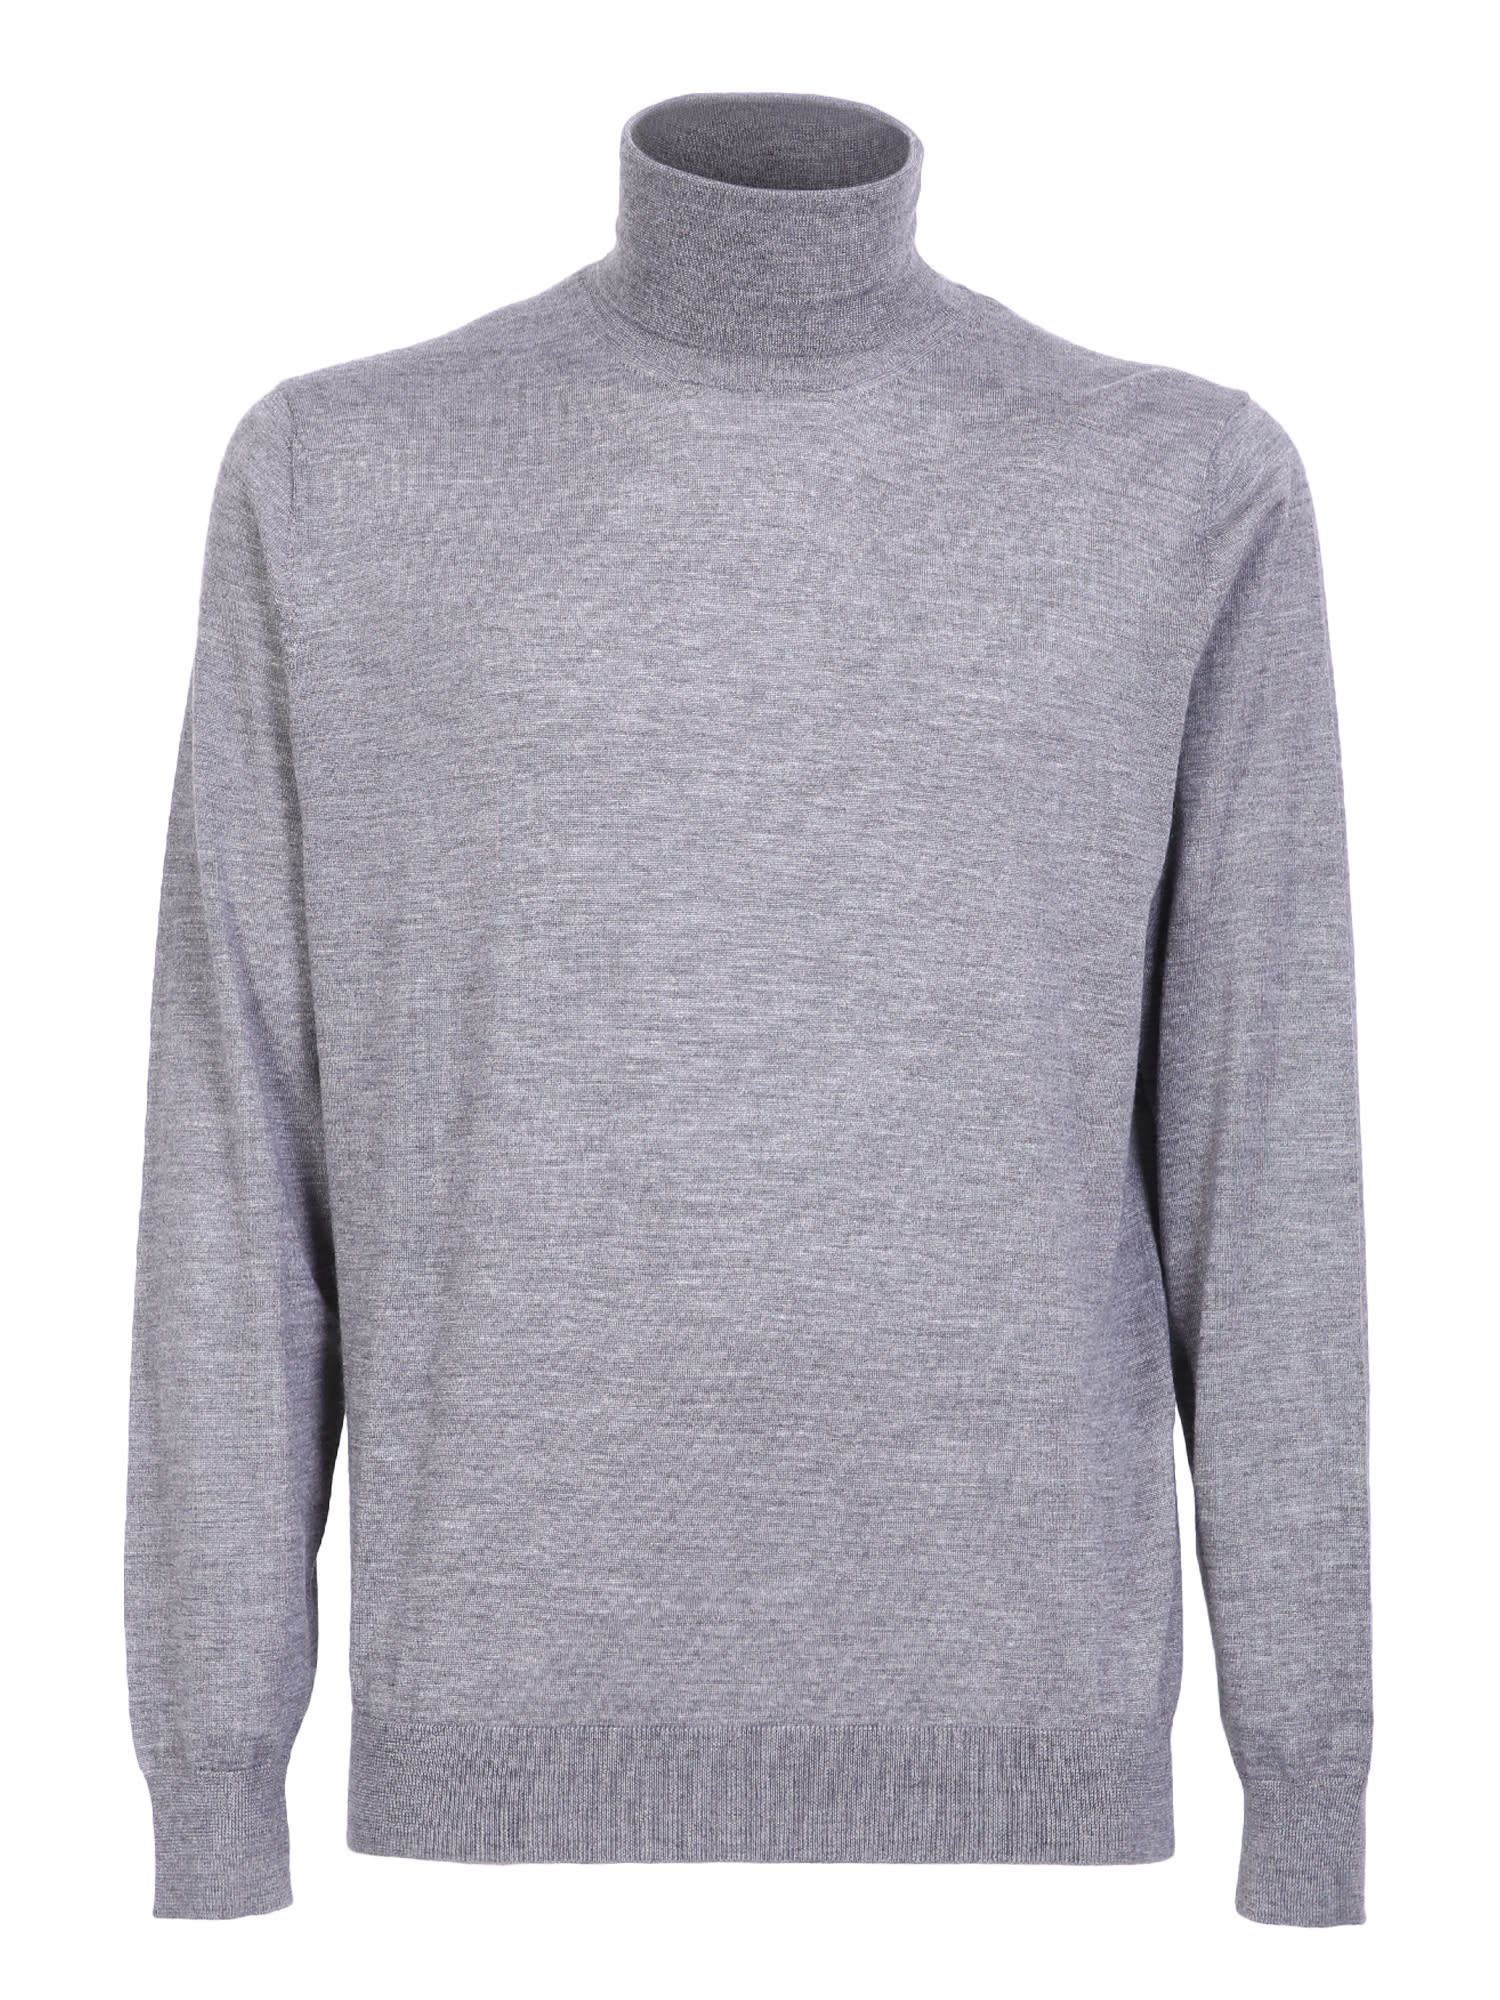 Colombo Grey Wool And Cashmere Sweater